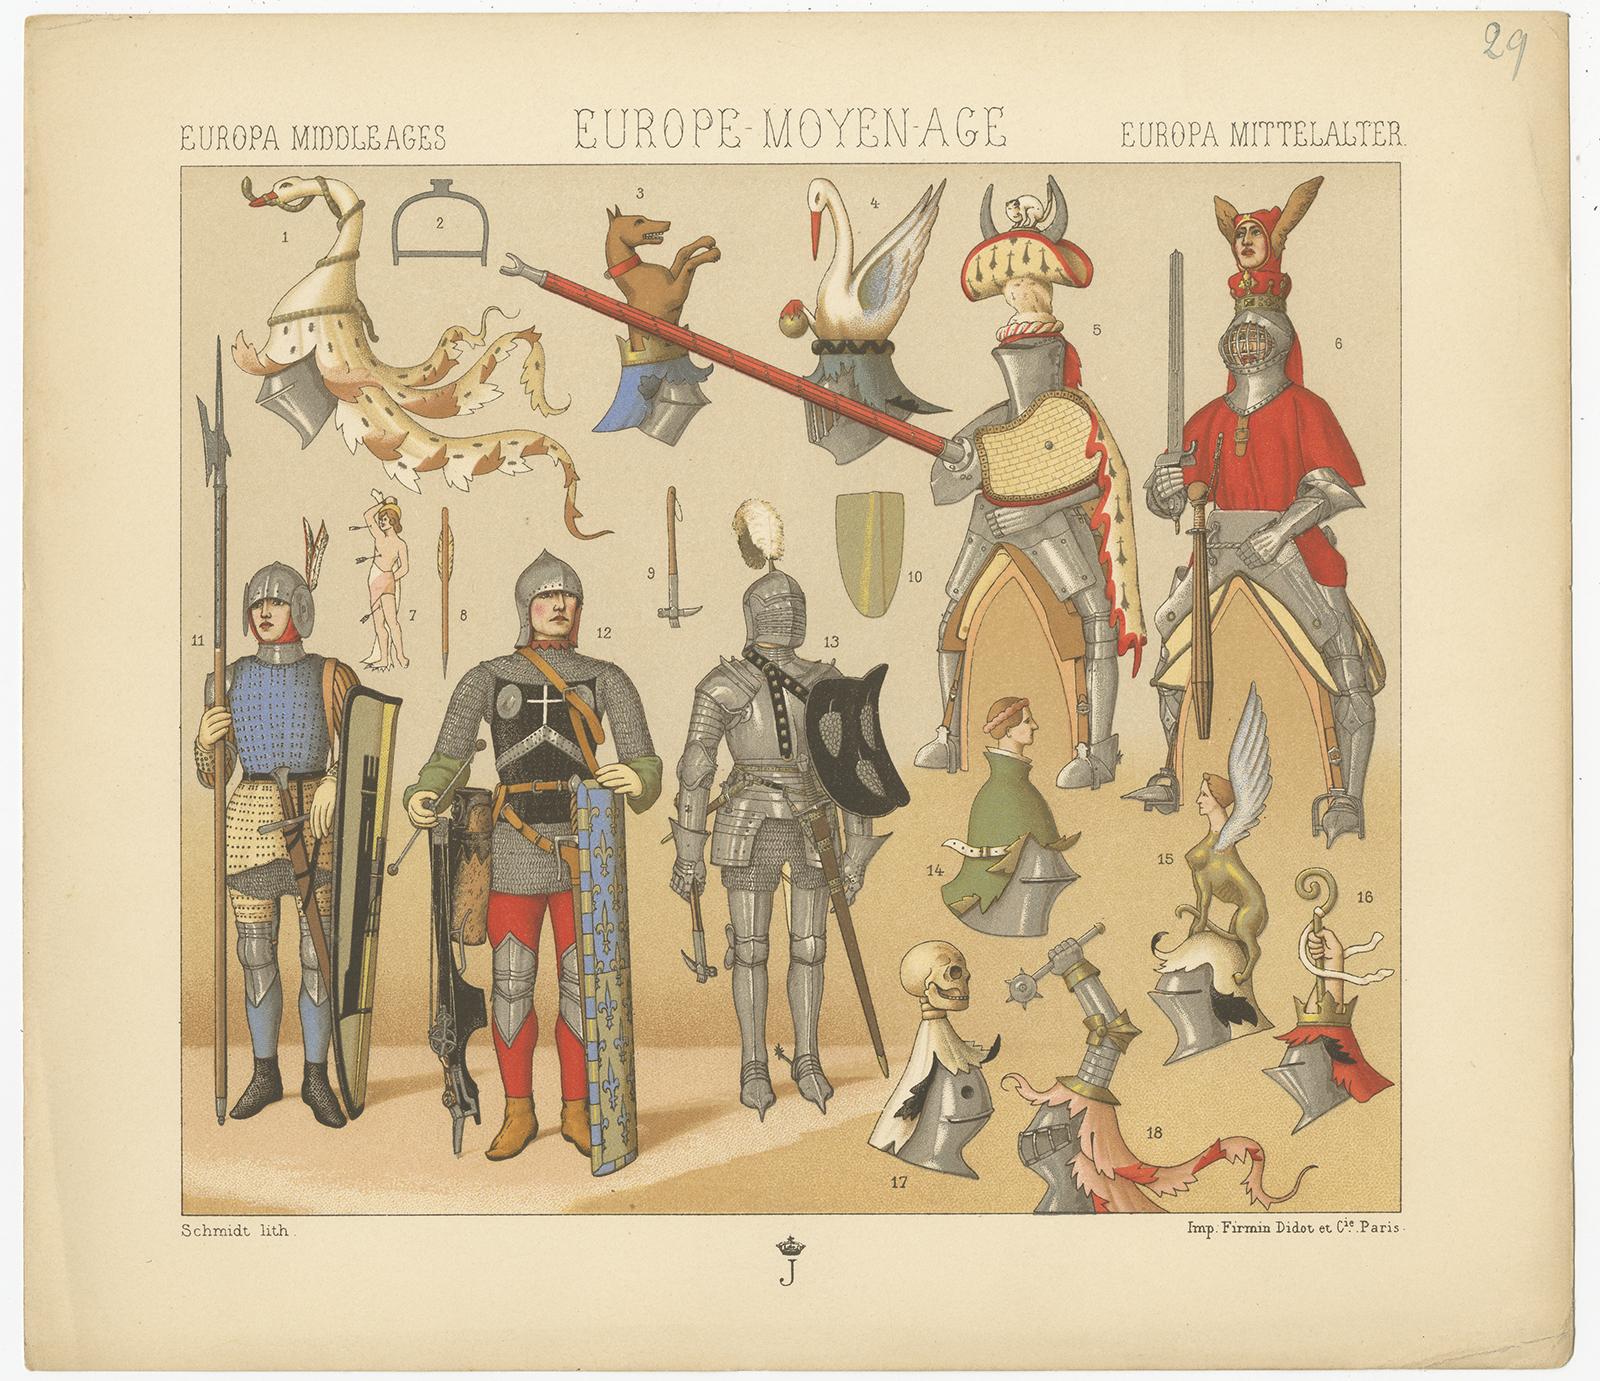 Antique print titled 'Europa Middle Ages - Europe Moyen Age - Europa Mittelalter'. Chromolithograph of European Middle Ages Armament'. This print originates from 'Le Costume Historique' by M.A. Racinet. Published circa 1880.